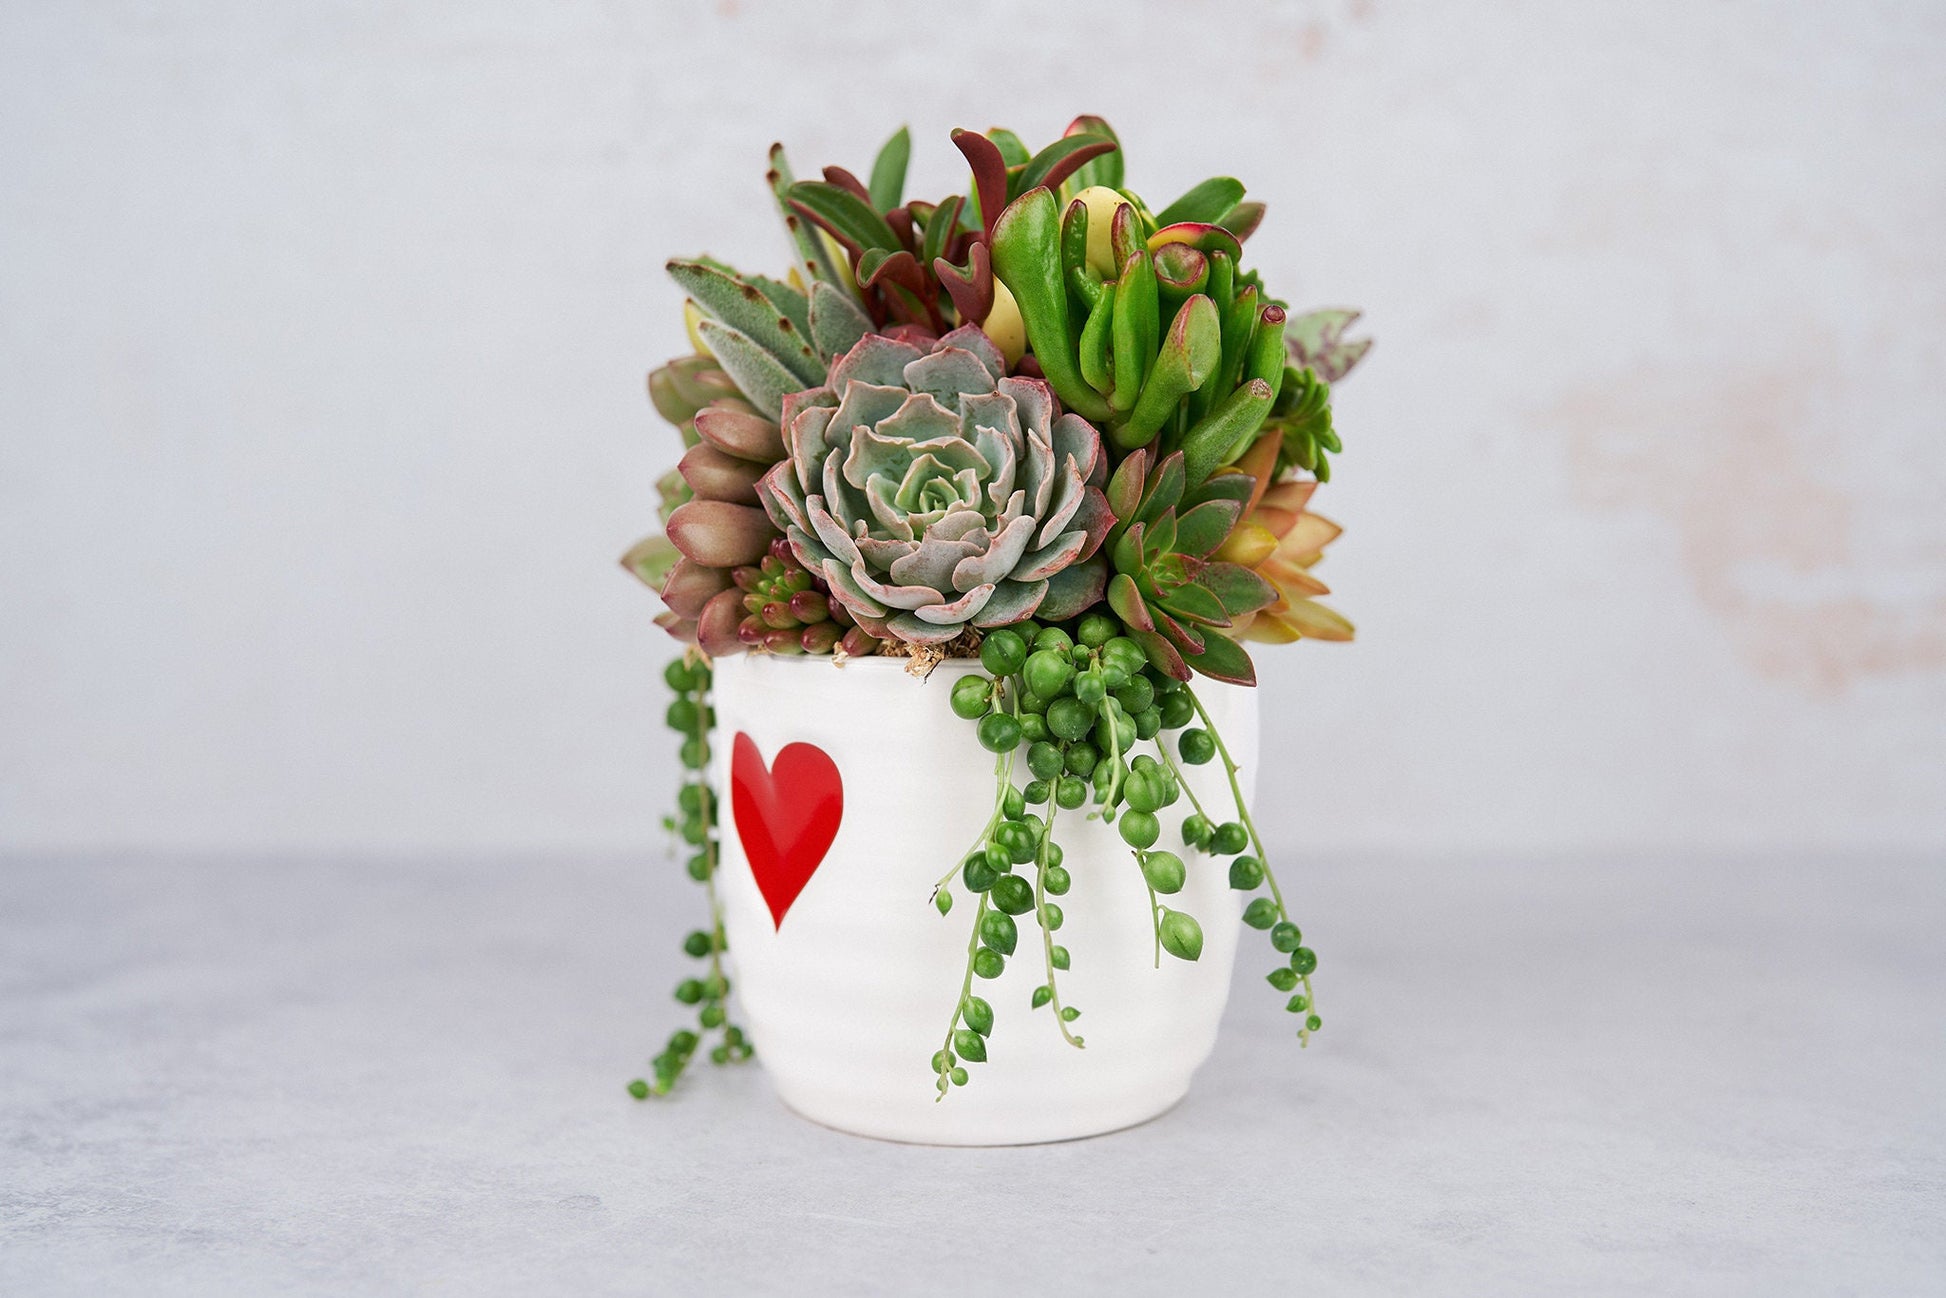 Red Heart Love Succulent Arrangement Valentines Day Gift: Living Succulent Gift, Centerpiece for Weddings & Events, Housewarming Gift